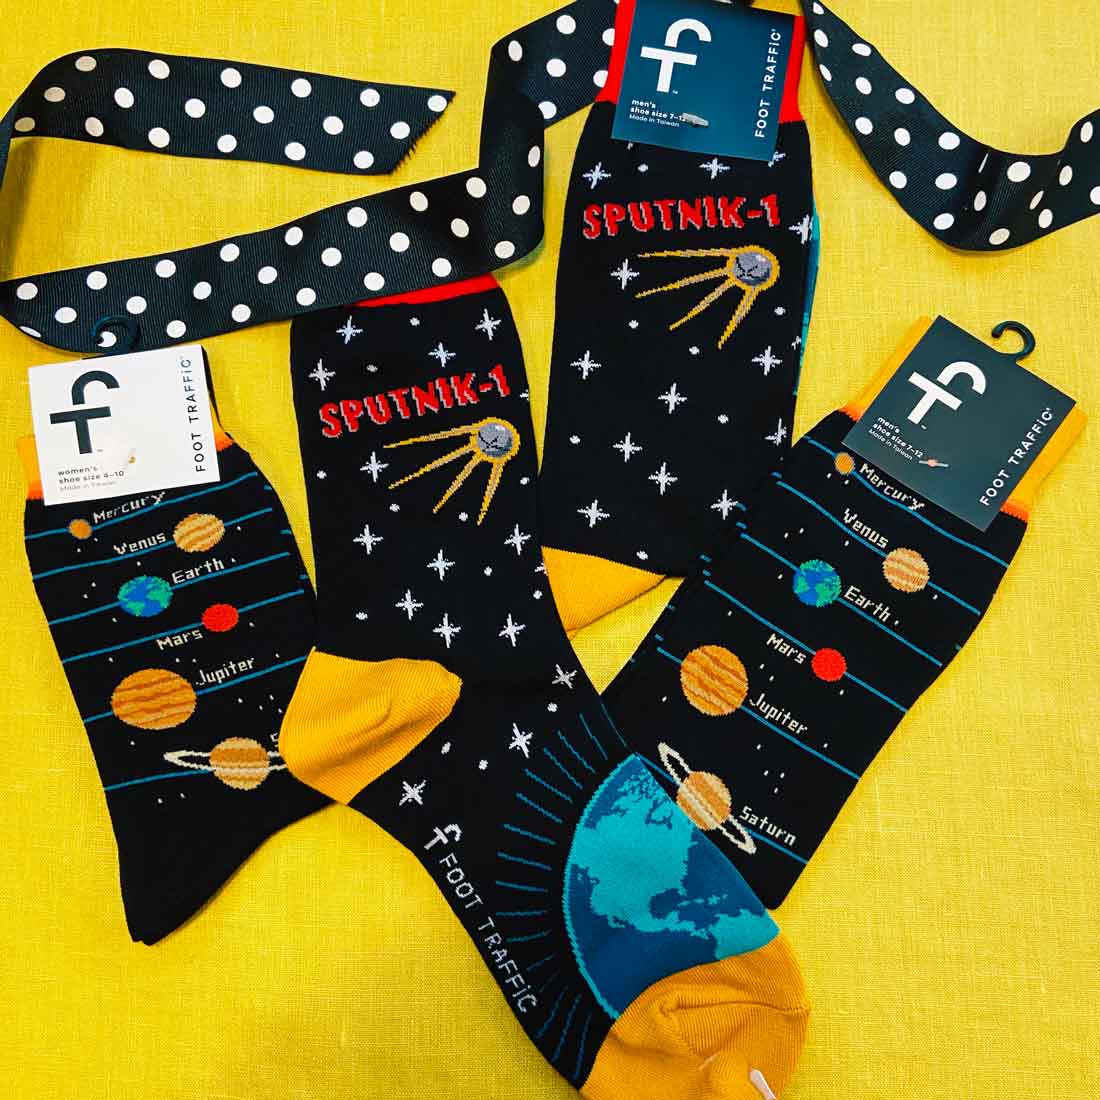 Sputnik and planets design socks on a yellow background with a black polka-dot ribbon.